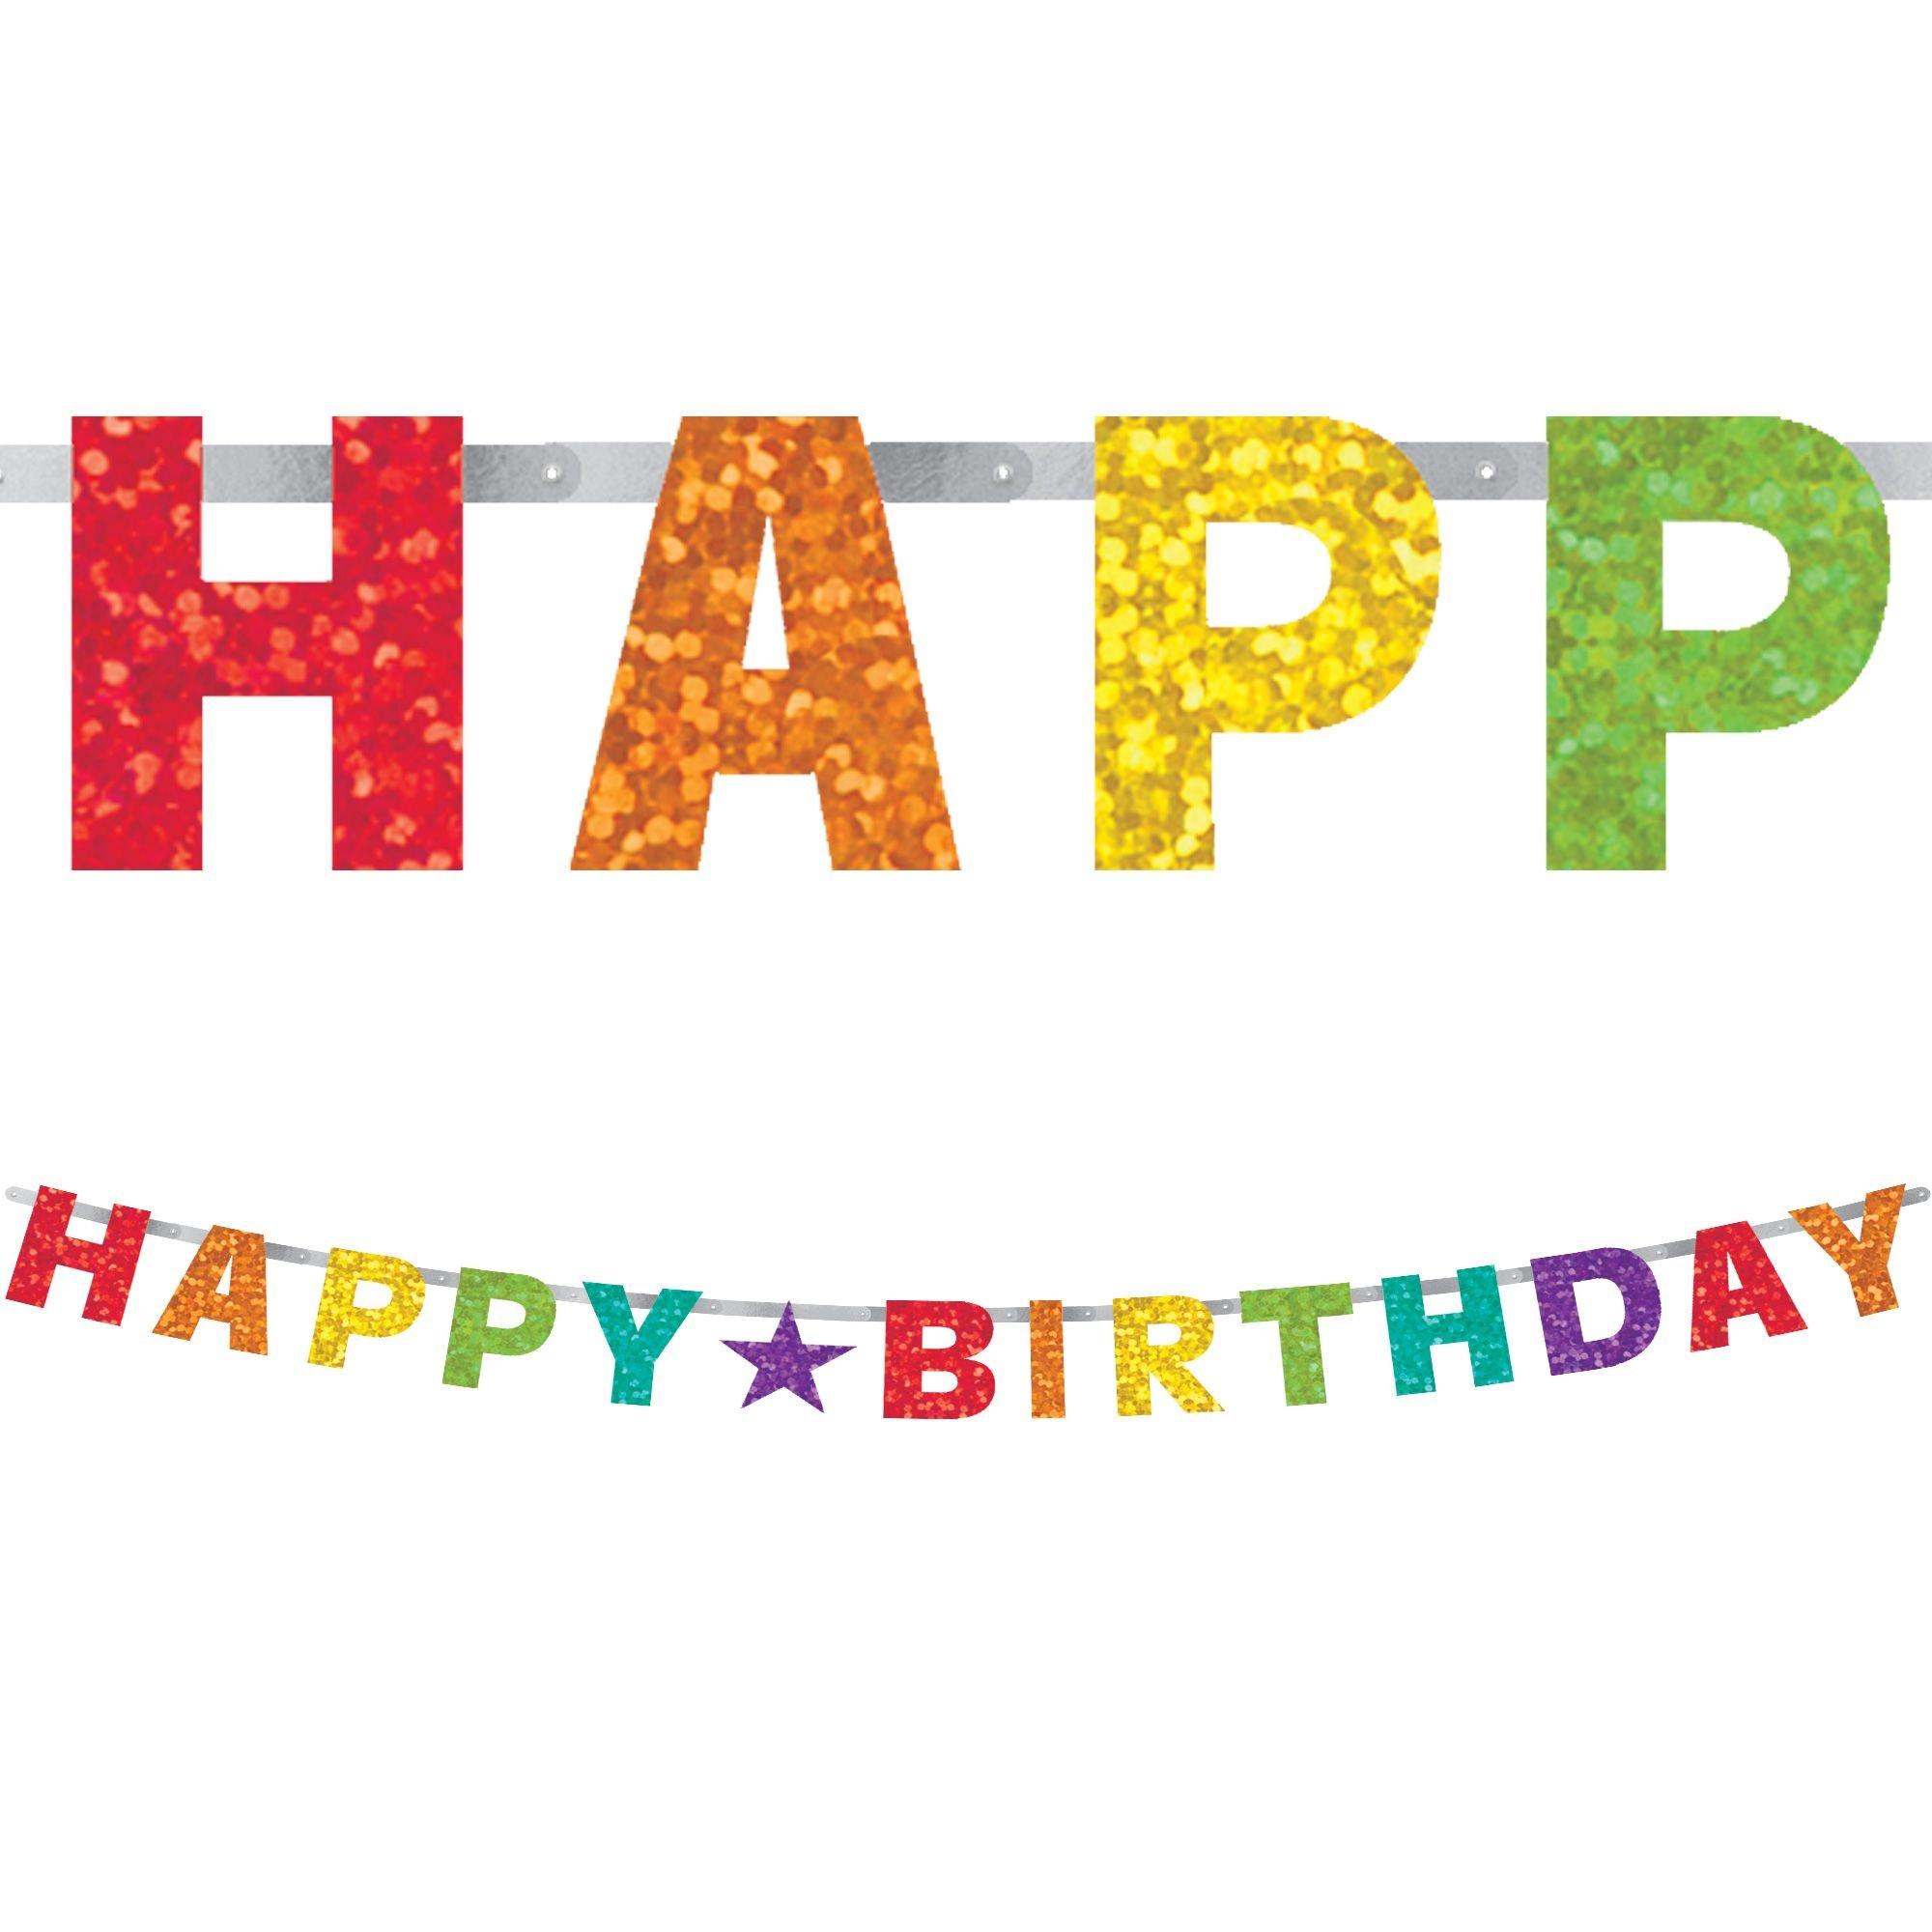 Custom Happy Birthday Banners - Party Banners | Party City